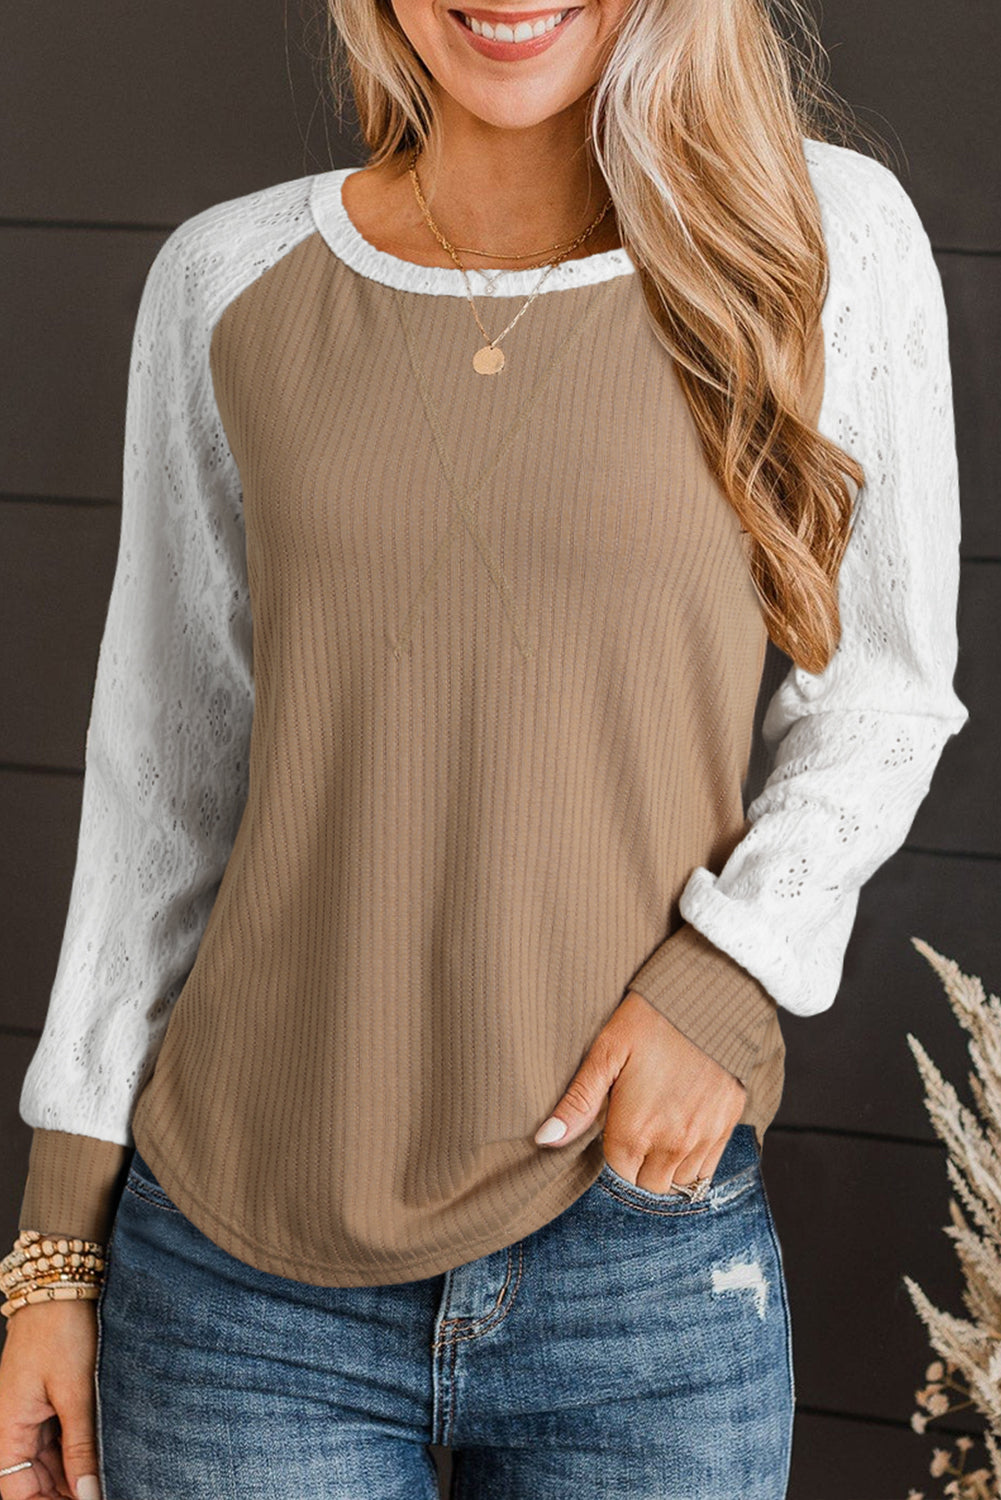 Light French Beige Lace Crochet Patch Long Sleeve Textured Top Item NO.: 2969